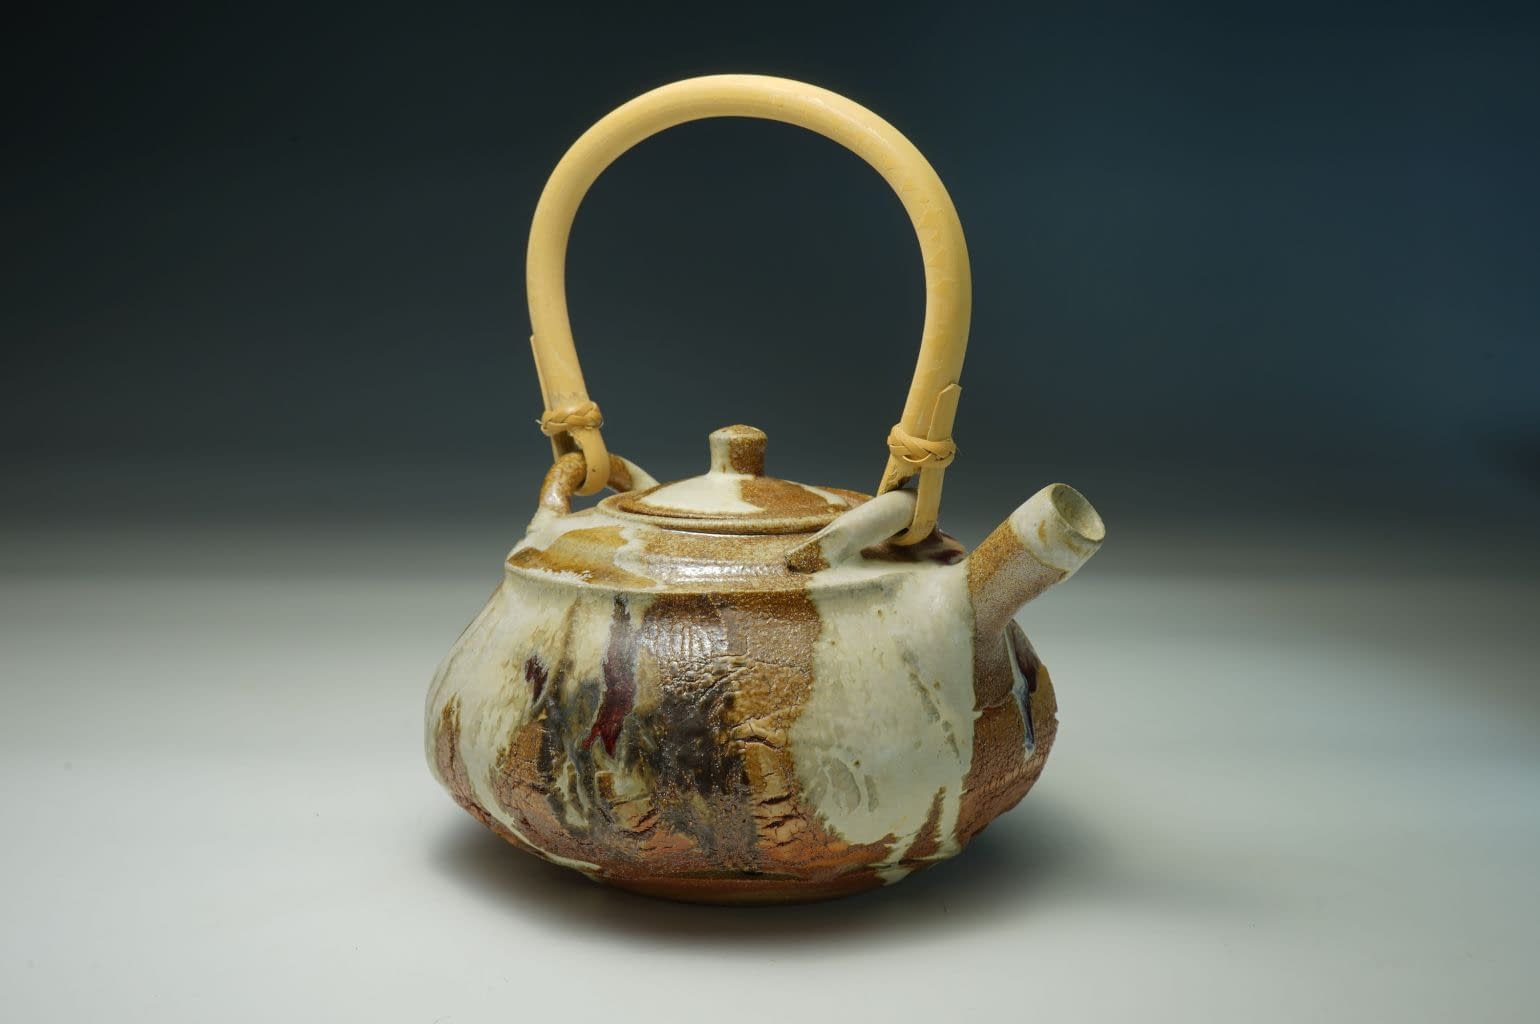 Wood-fired teapot with sculptured surface, unique piece from my private collection.